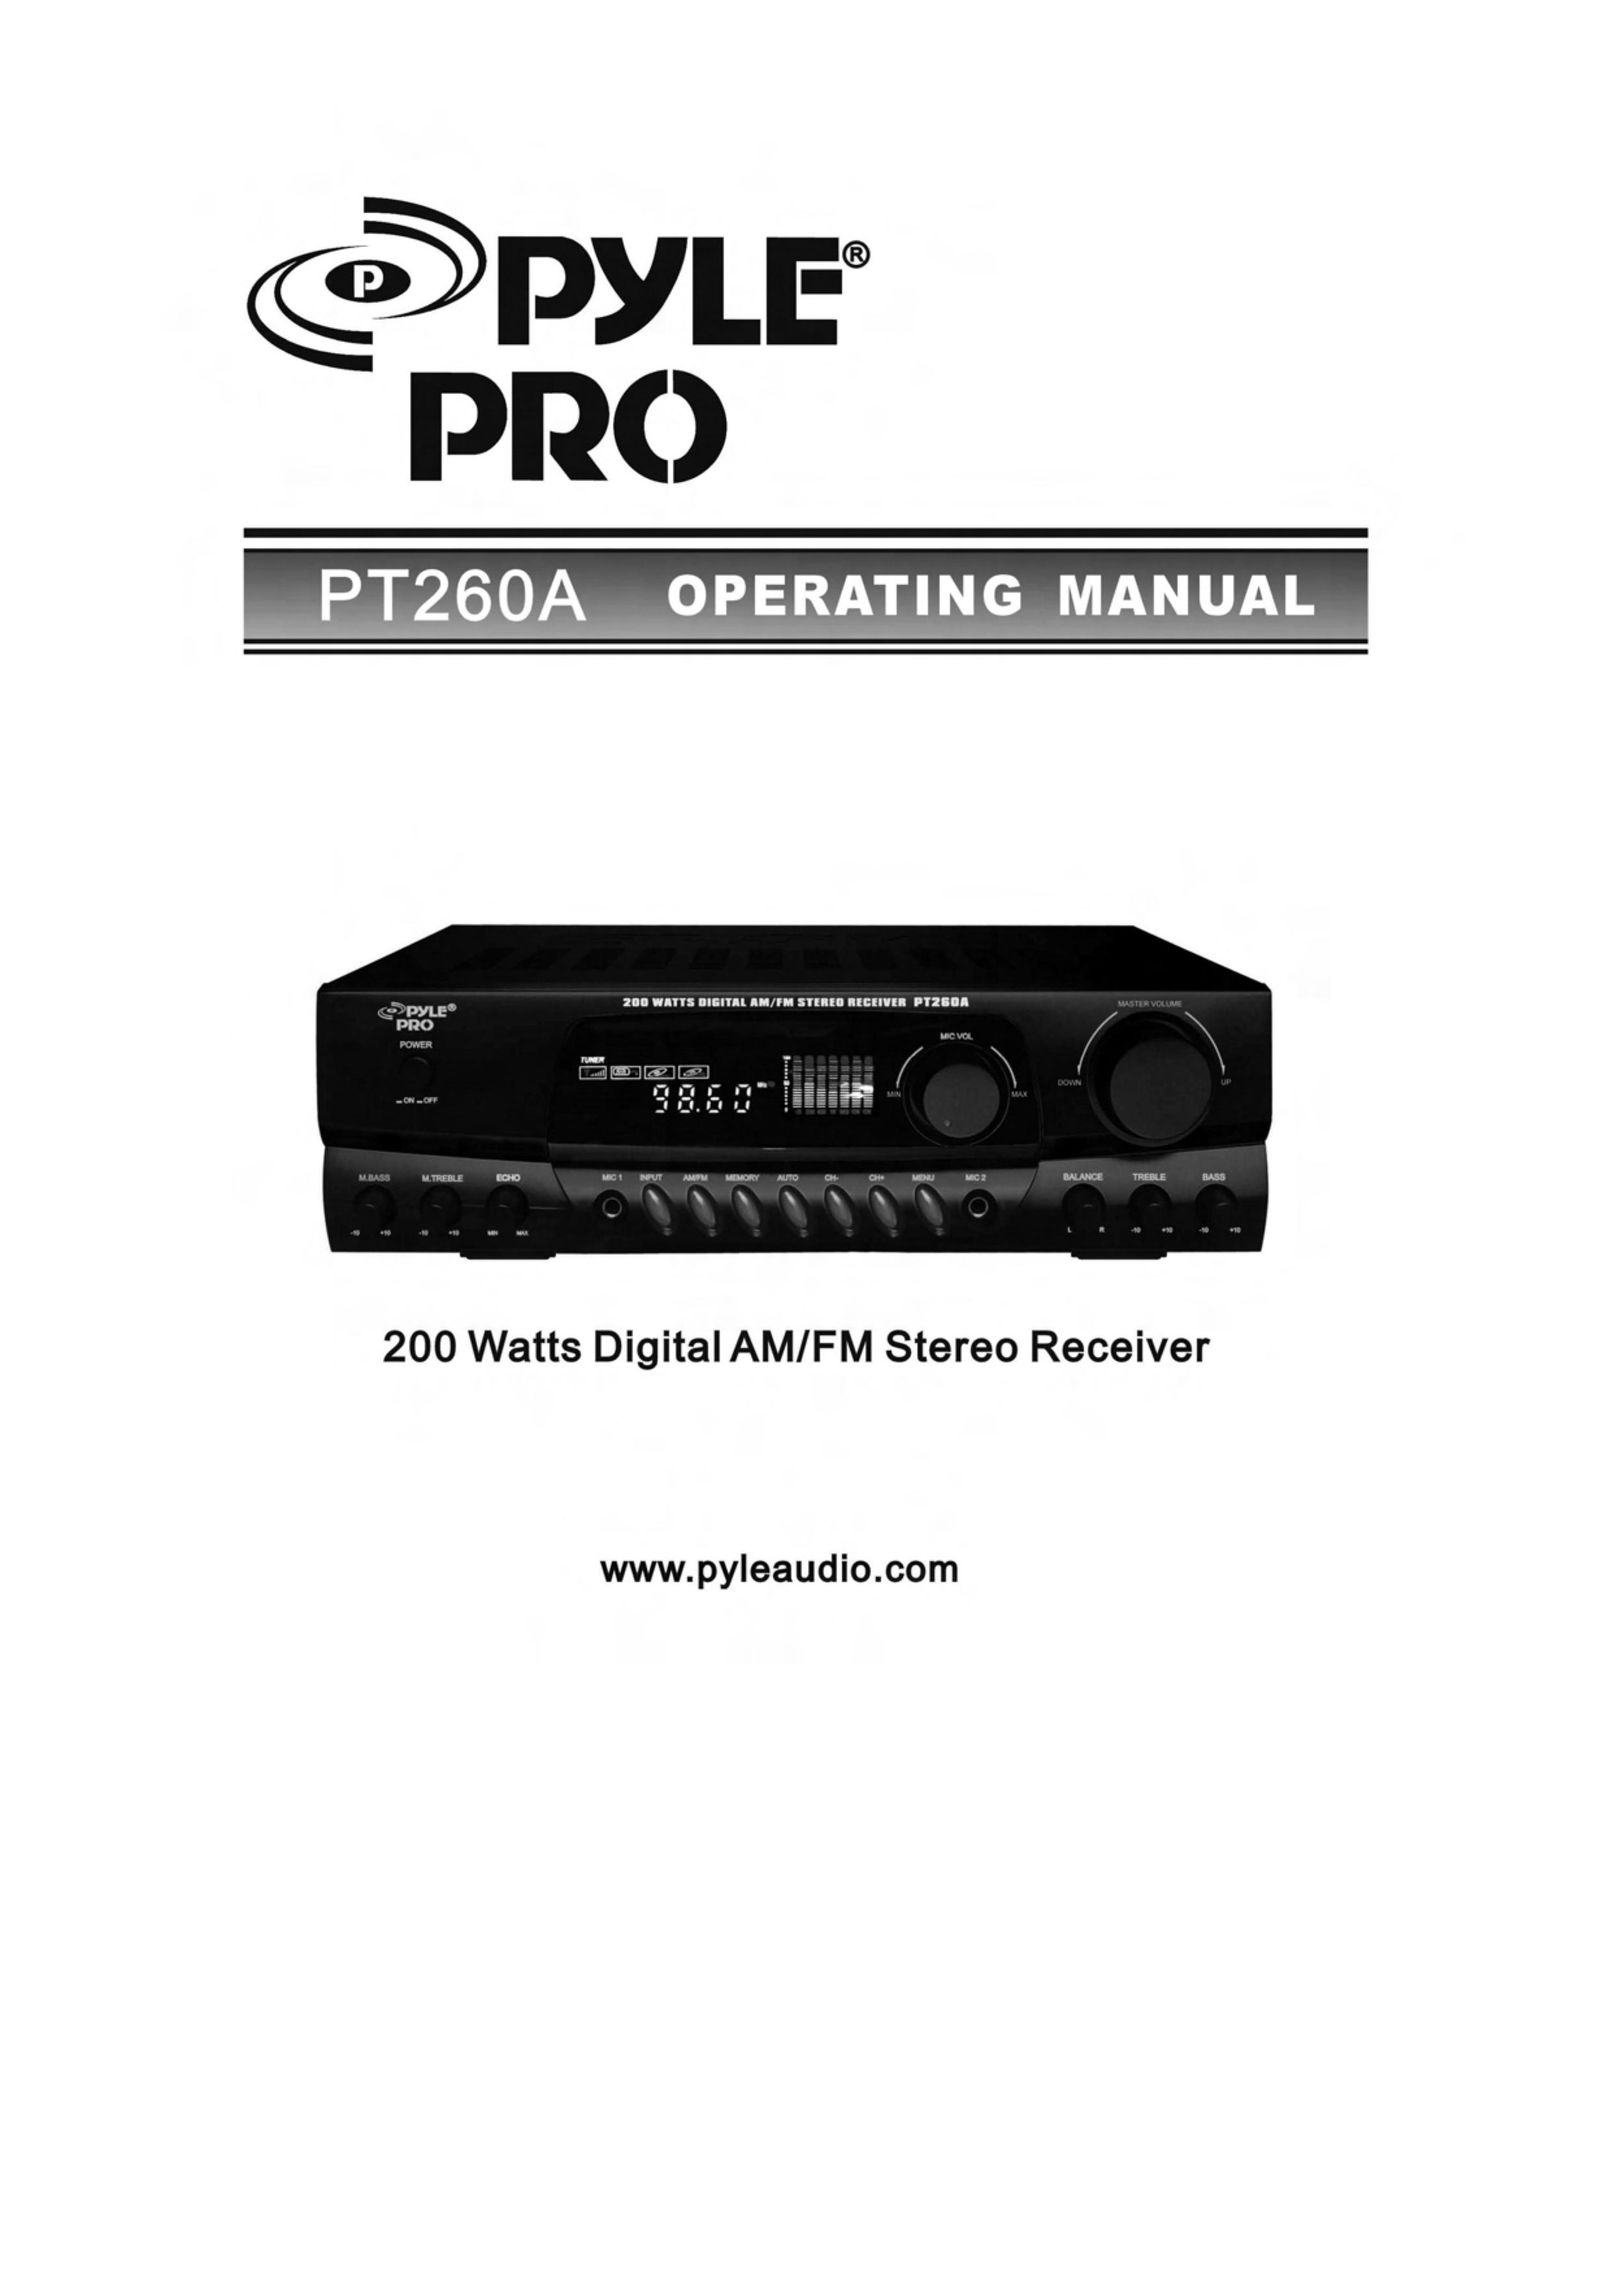 PYLE Audio PT260A Stereo Receiver User Manual